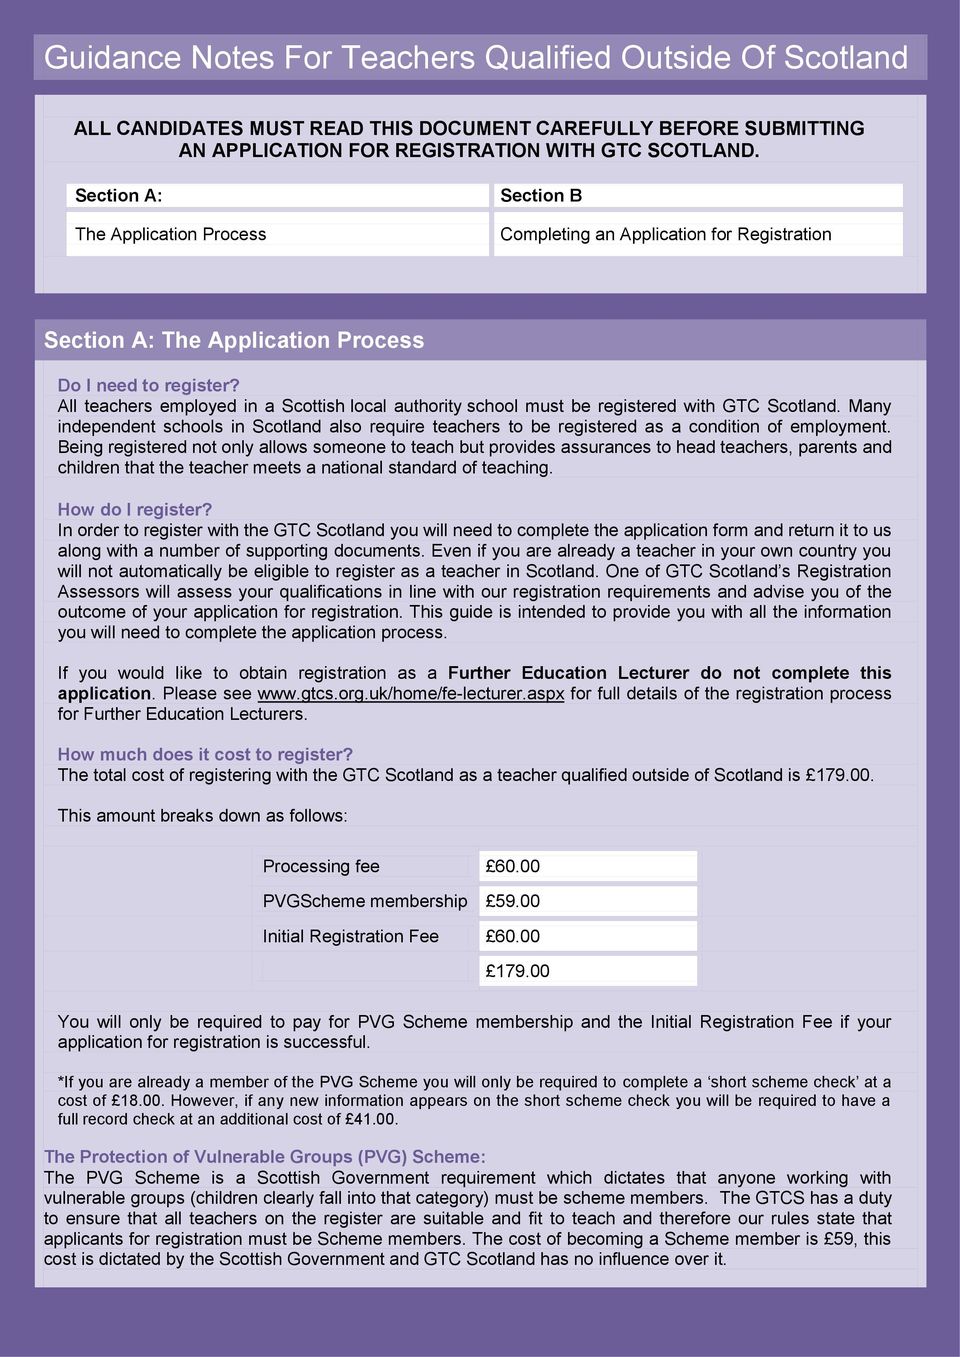 All teachers employed in a Scottish local authority school must be registered with GTC Scotland.